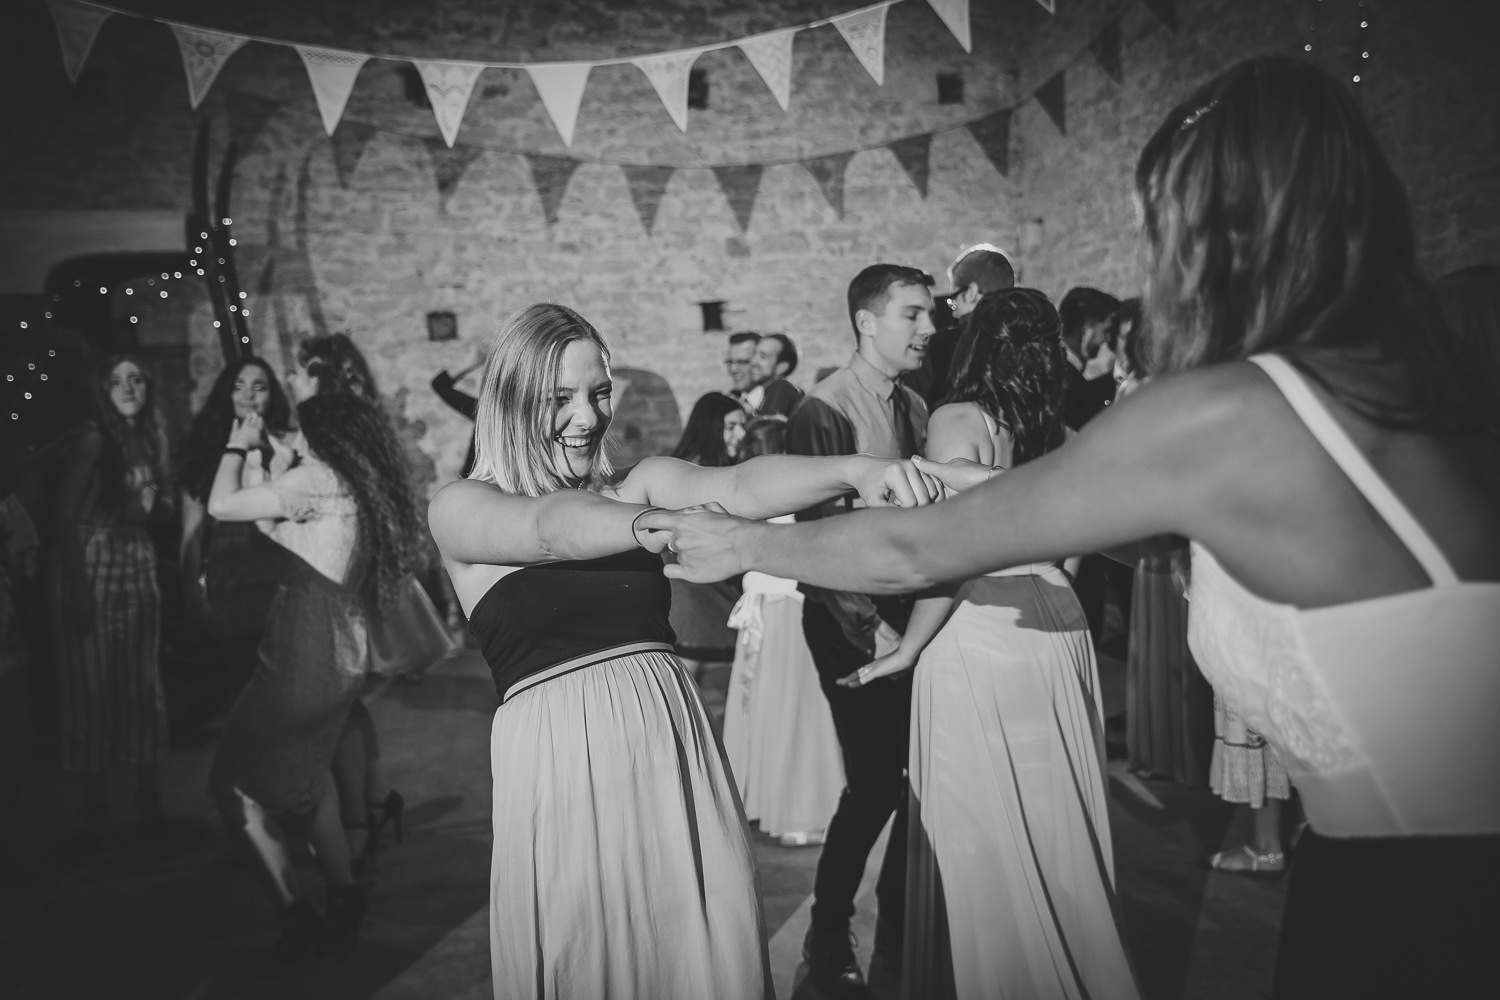 People dancing during a wedding party.